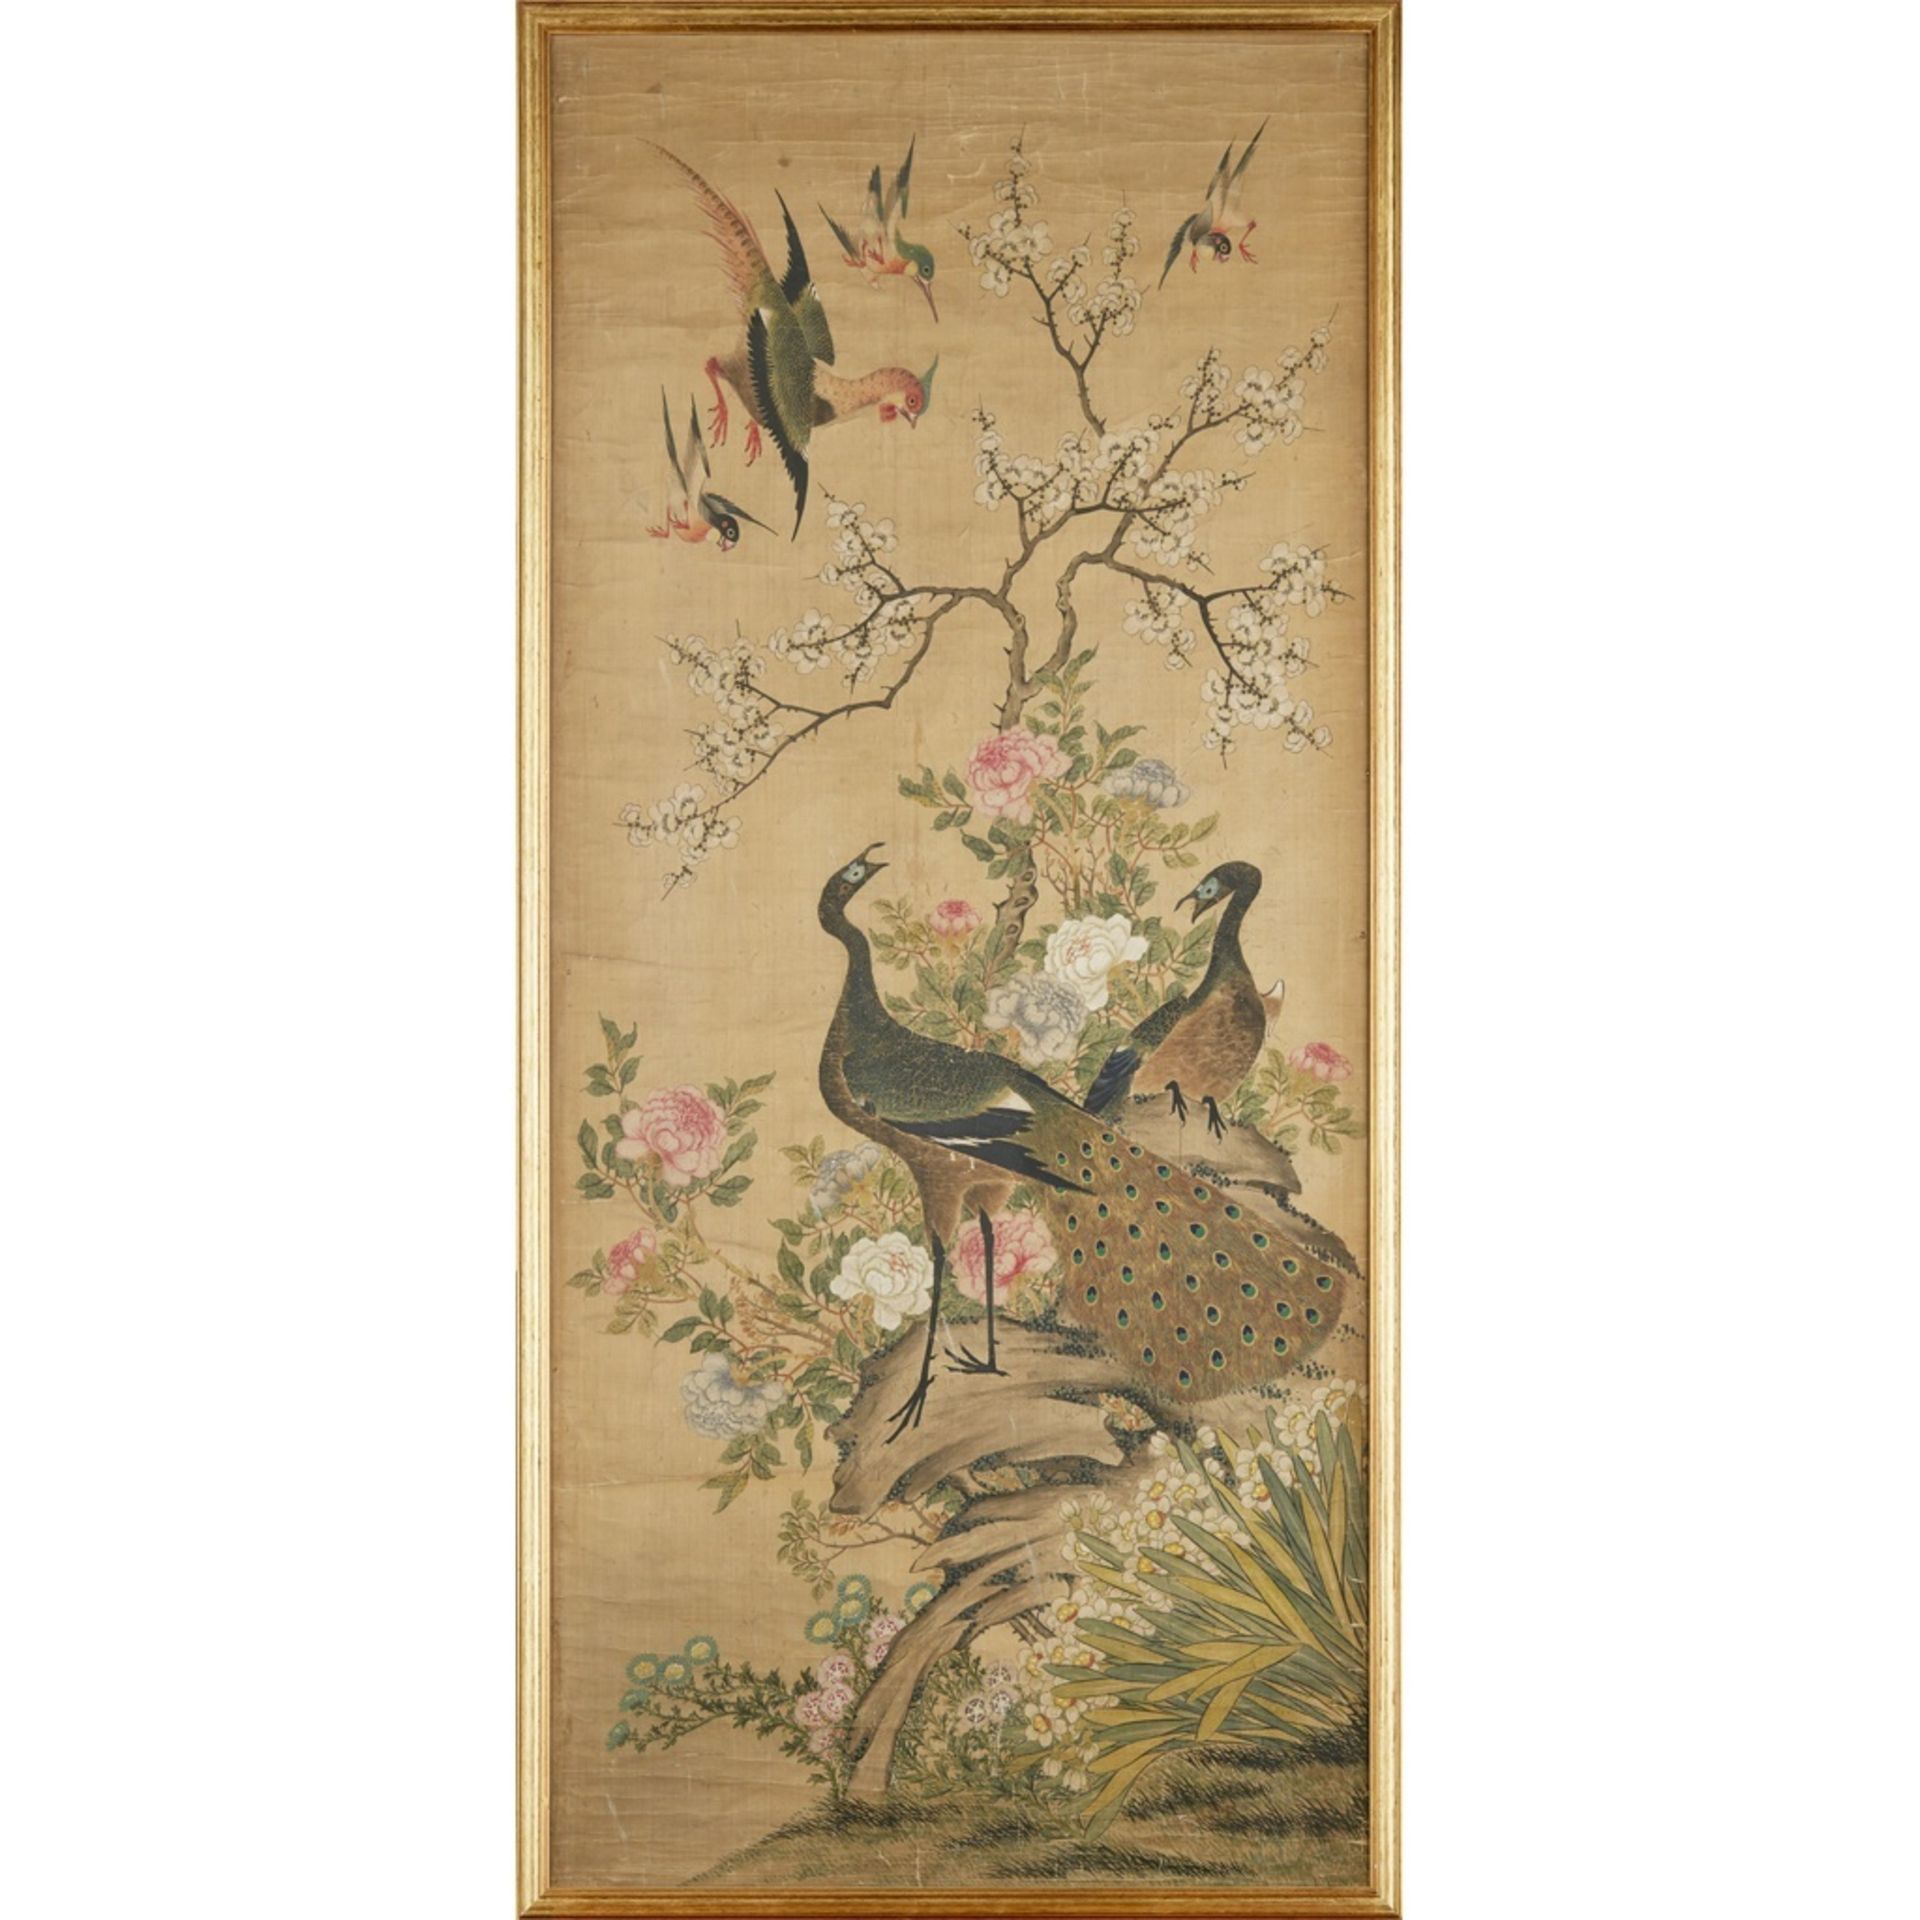 CHINESE SCHOOL STYLE INK AND COLOUR PAINTING QING DYNASTY, 18TH-19TH CENTURY